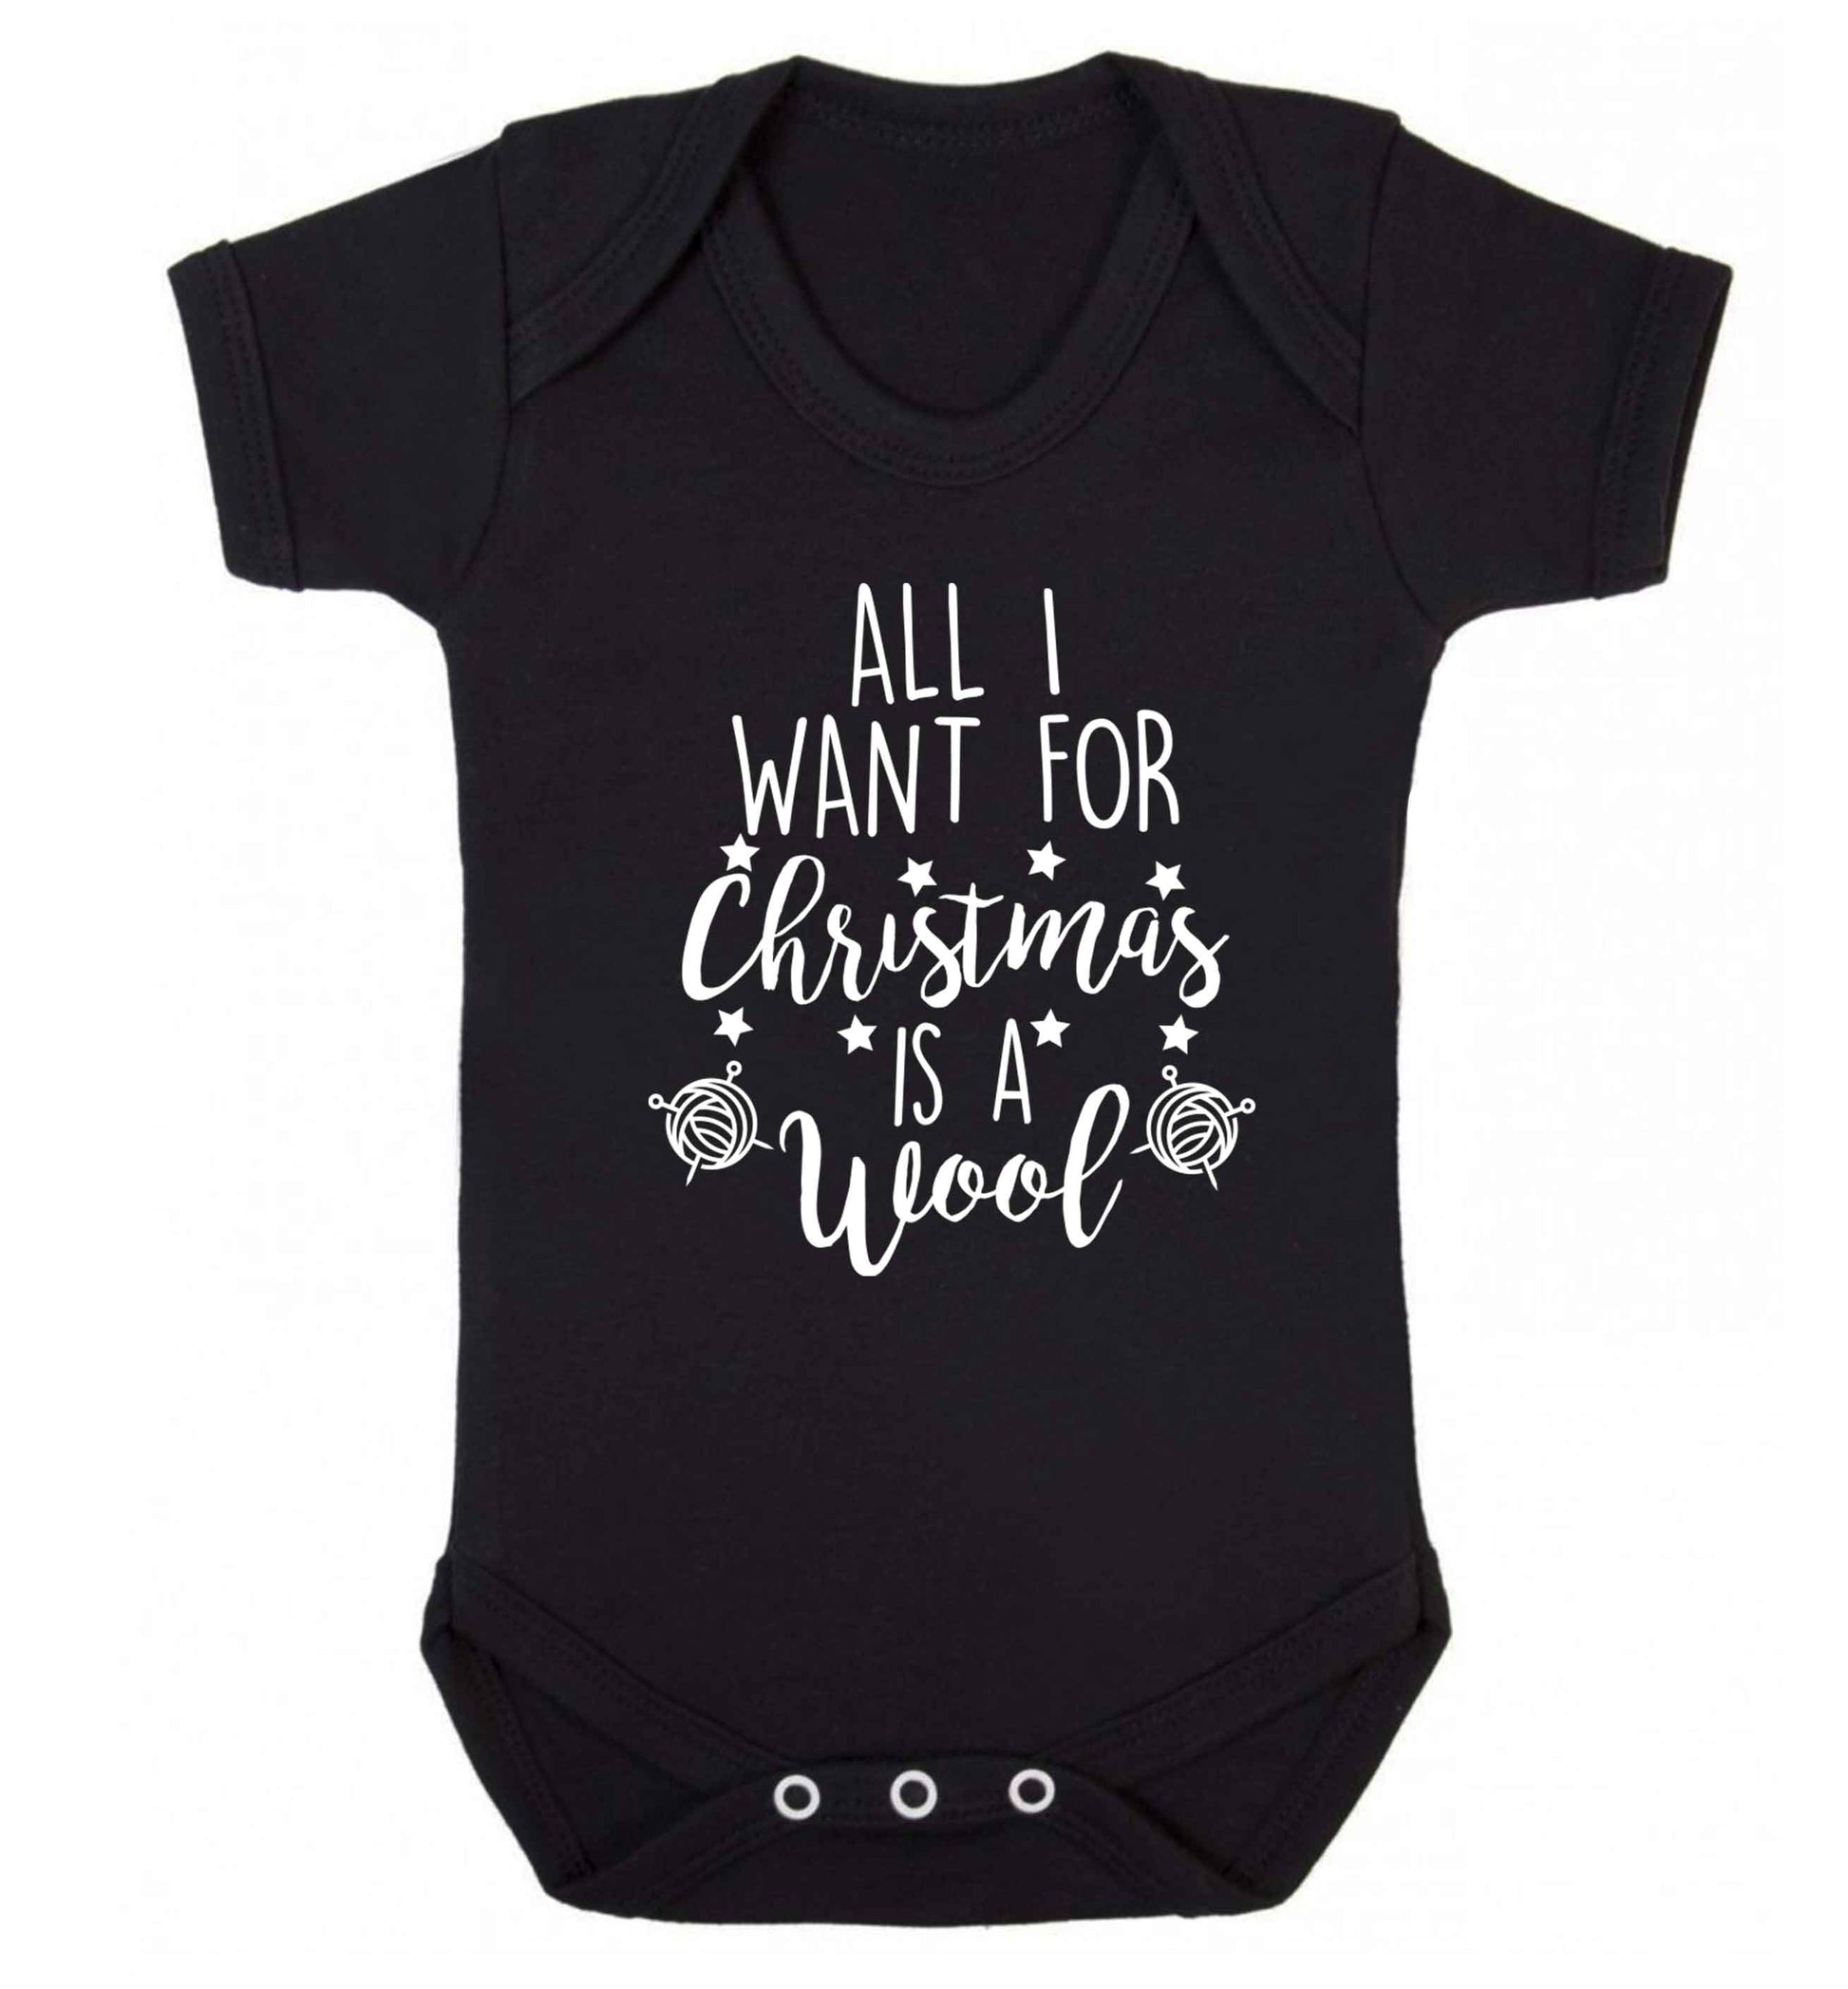 All I want for Christmas is wool! Baby Vest black 18-24 months